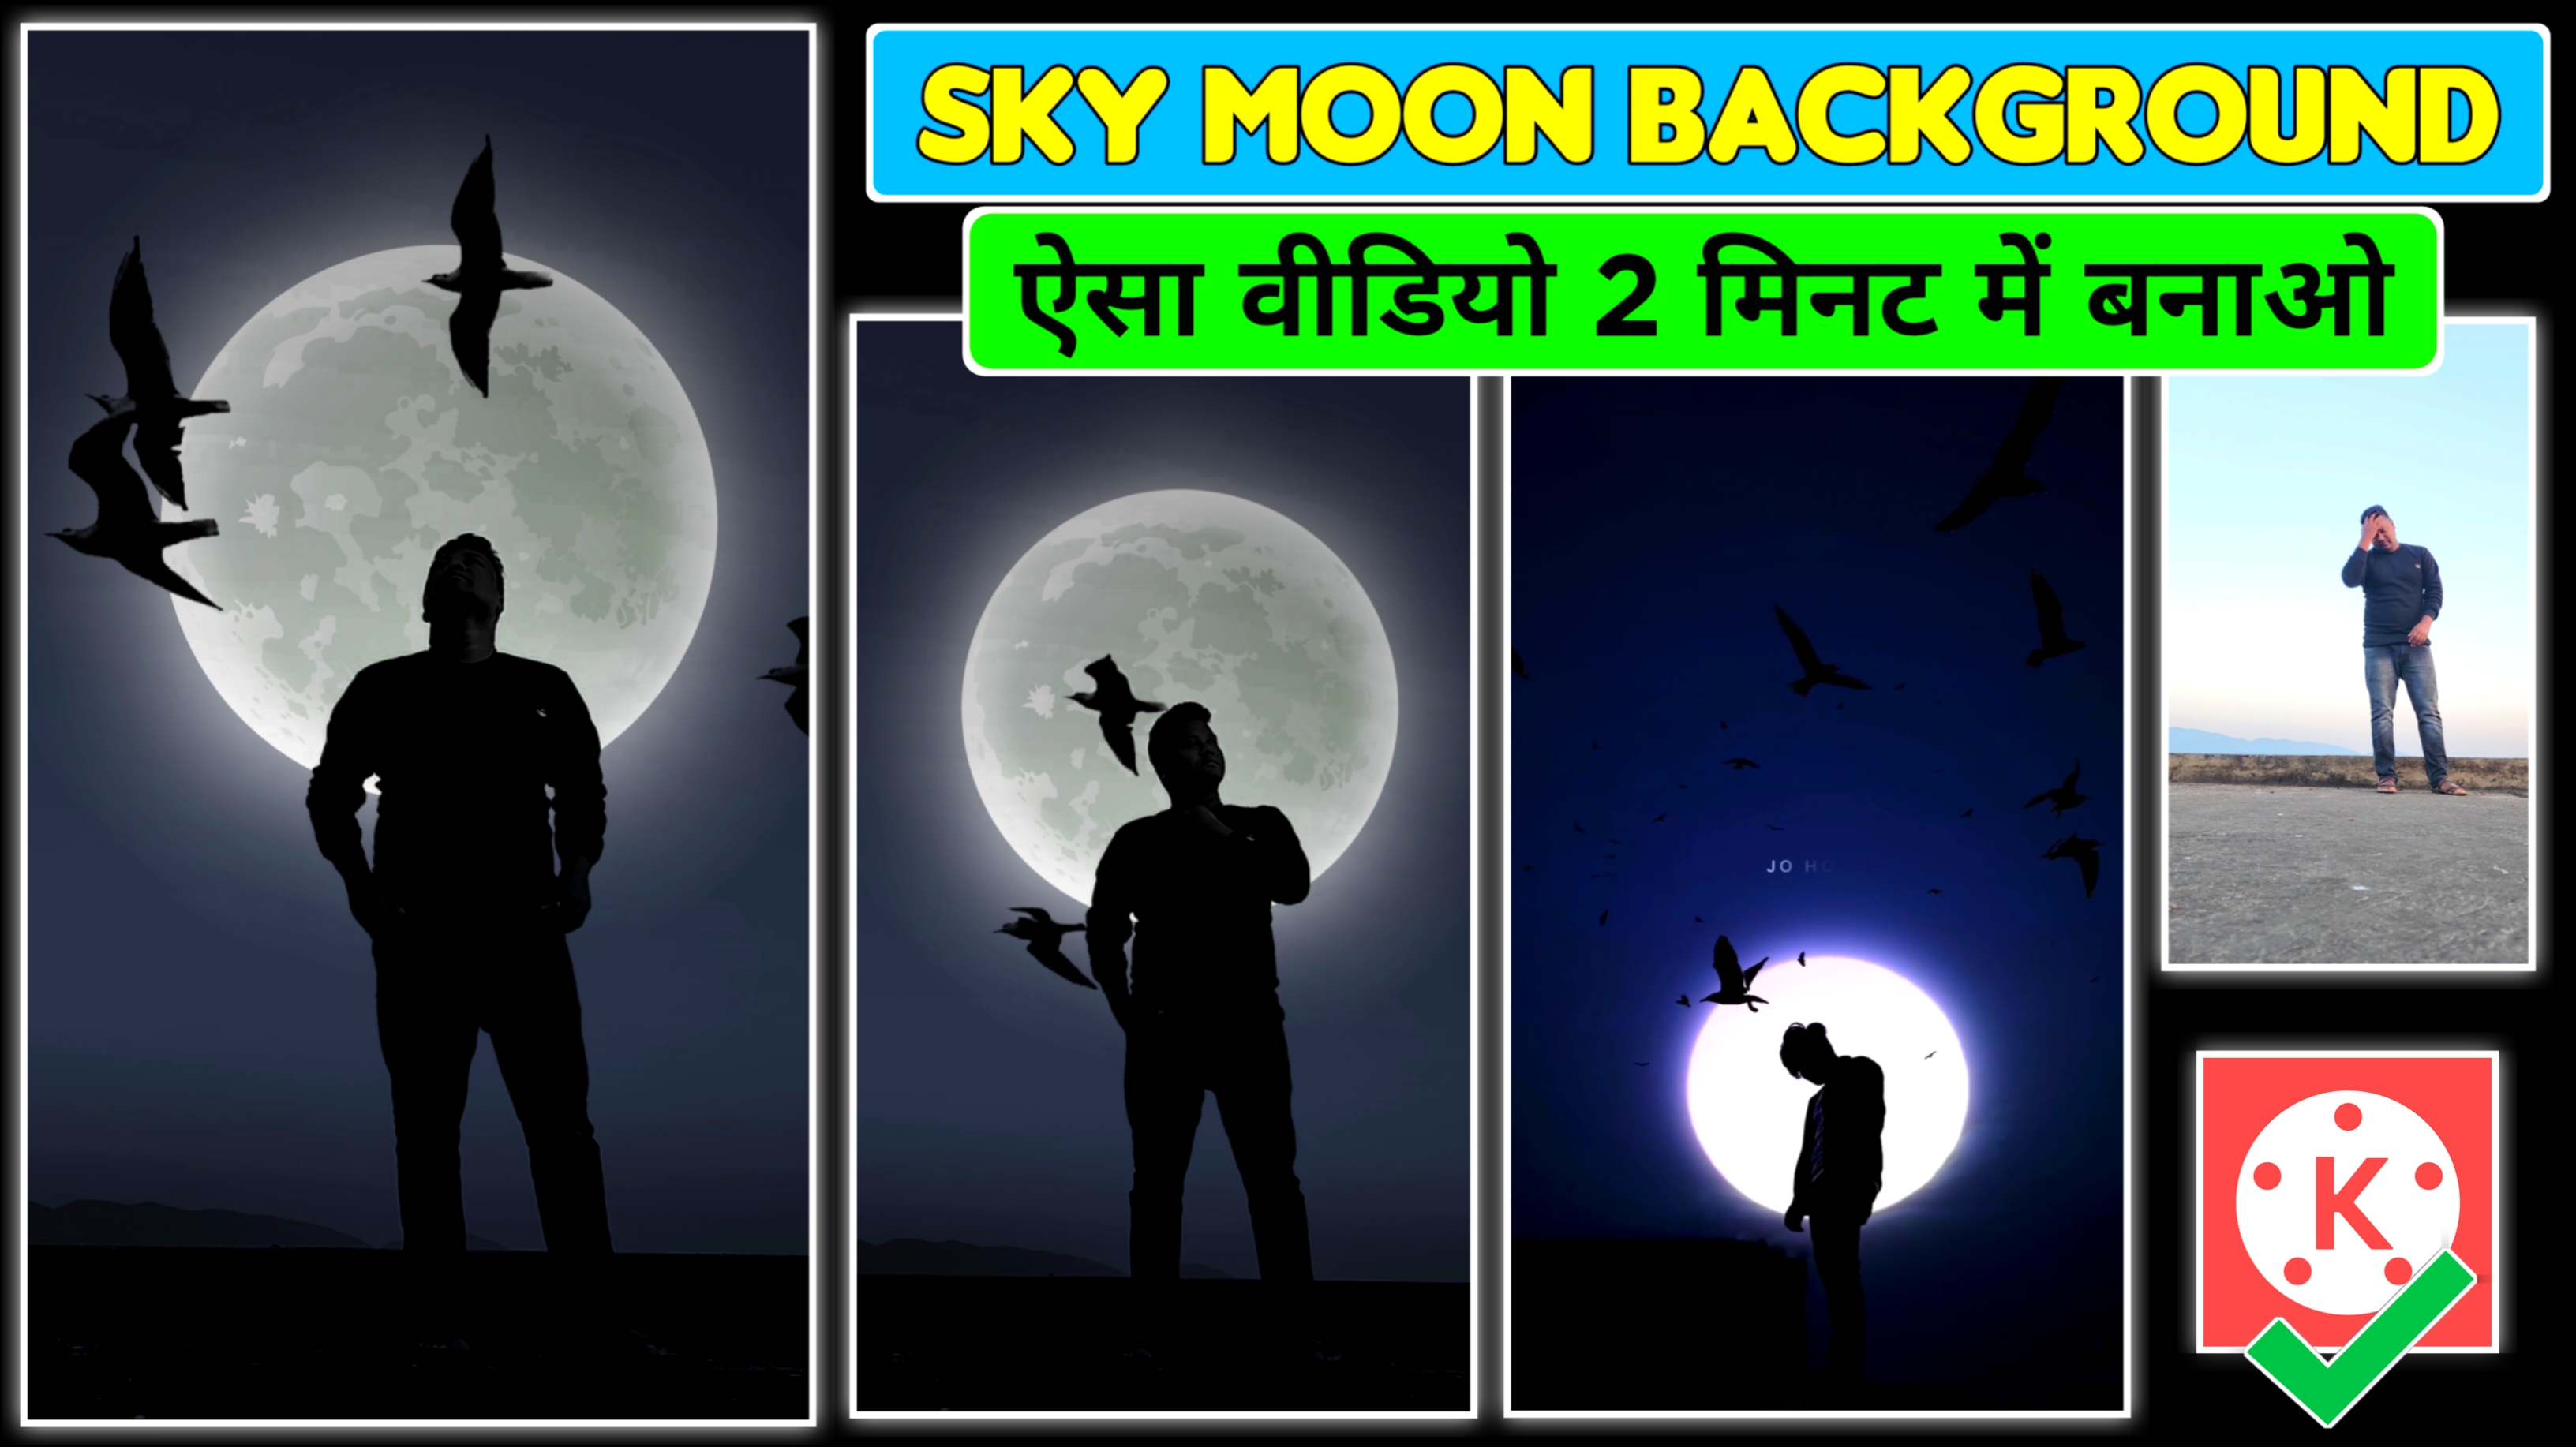 How To Make Sky Moon Background Video || Sky Moon Background Video Editing || Kinemaster Video Editing